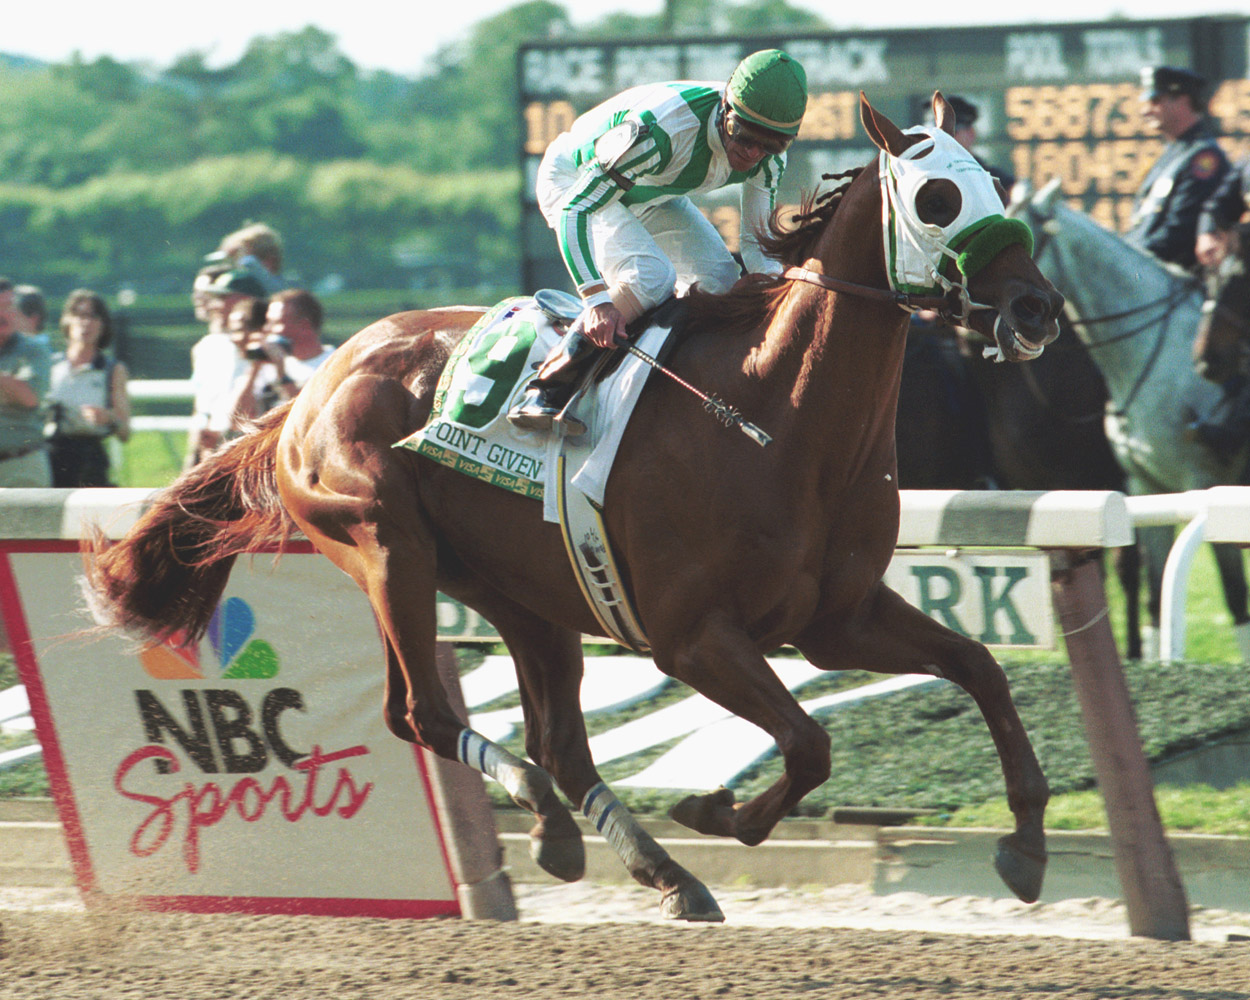 Point Given (Gary Stevens up) winning the 2001 Belmont Stakes (NYRA)